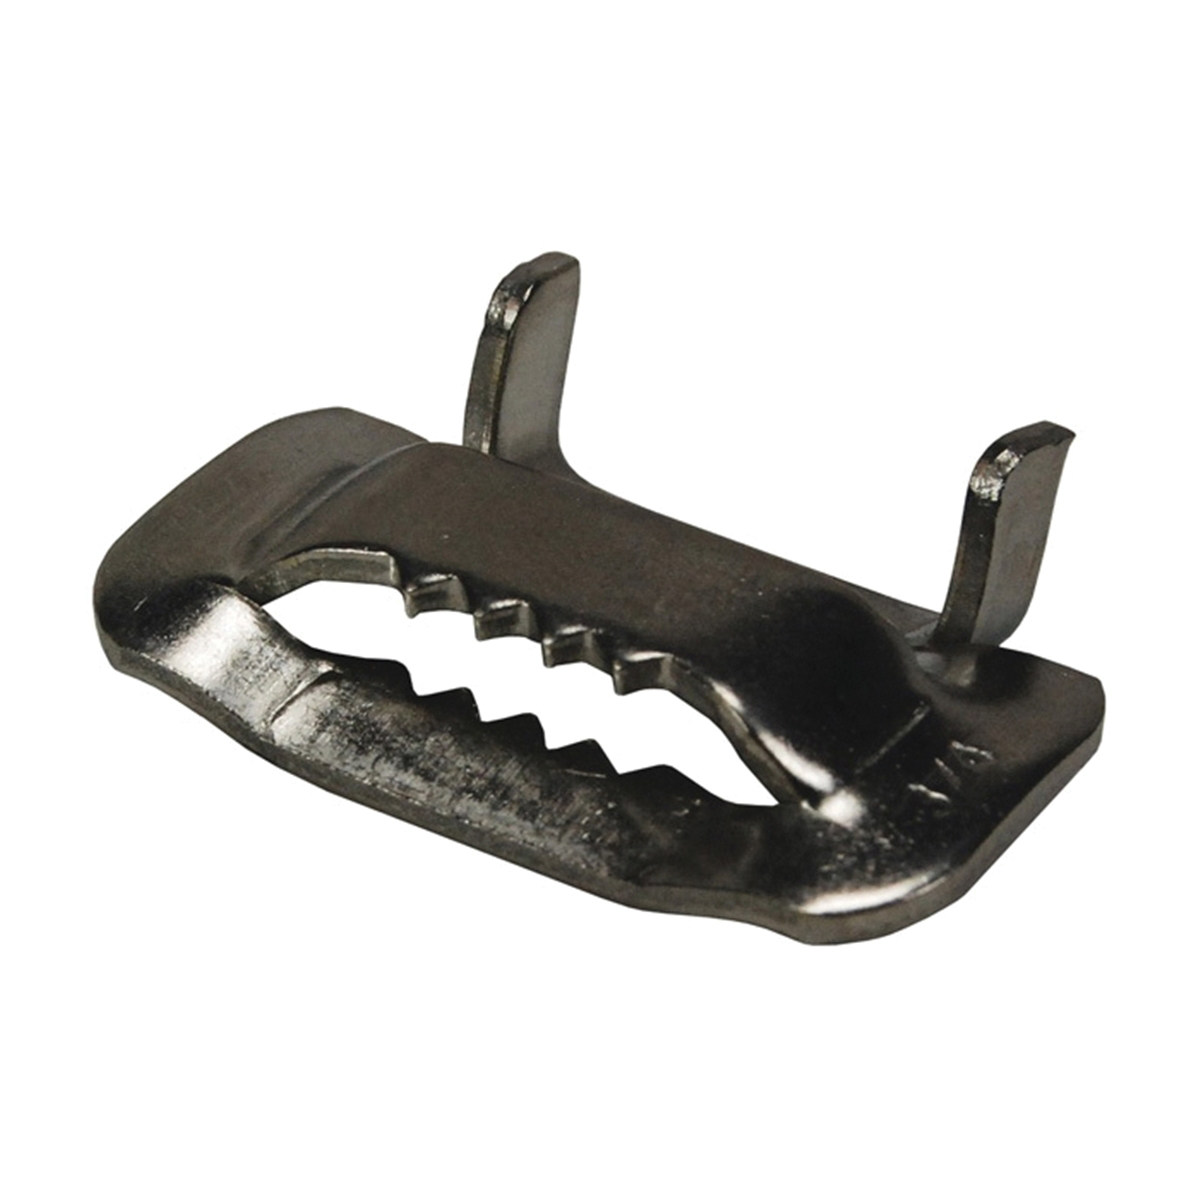 Clamp Buckle, 201 Stainless Steel, For Use With: C2, 51960 Band Clamp Tools